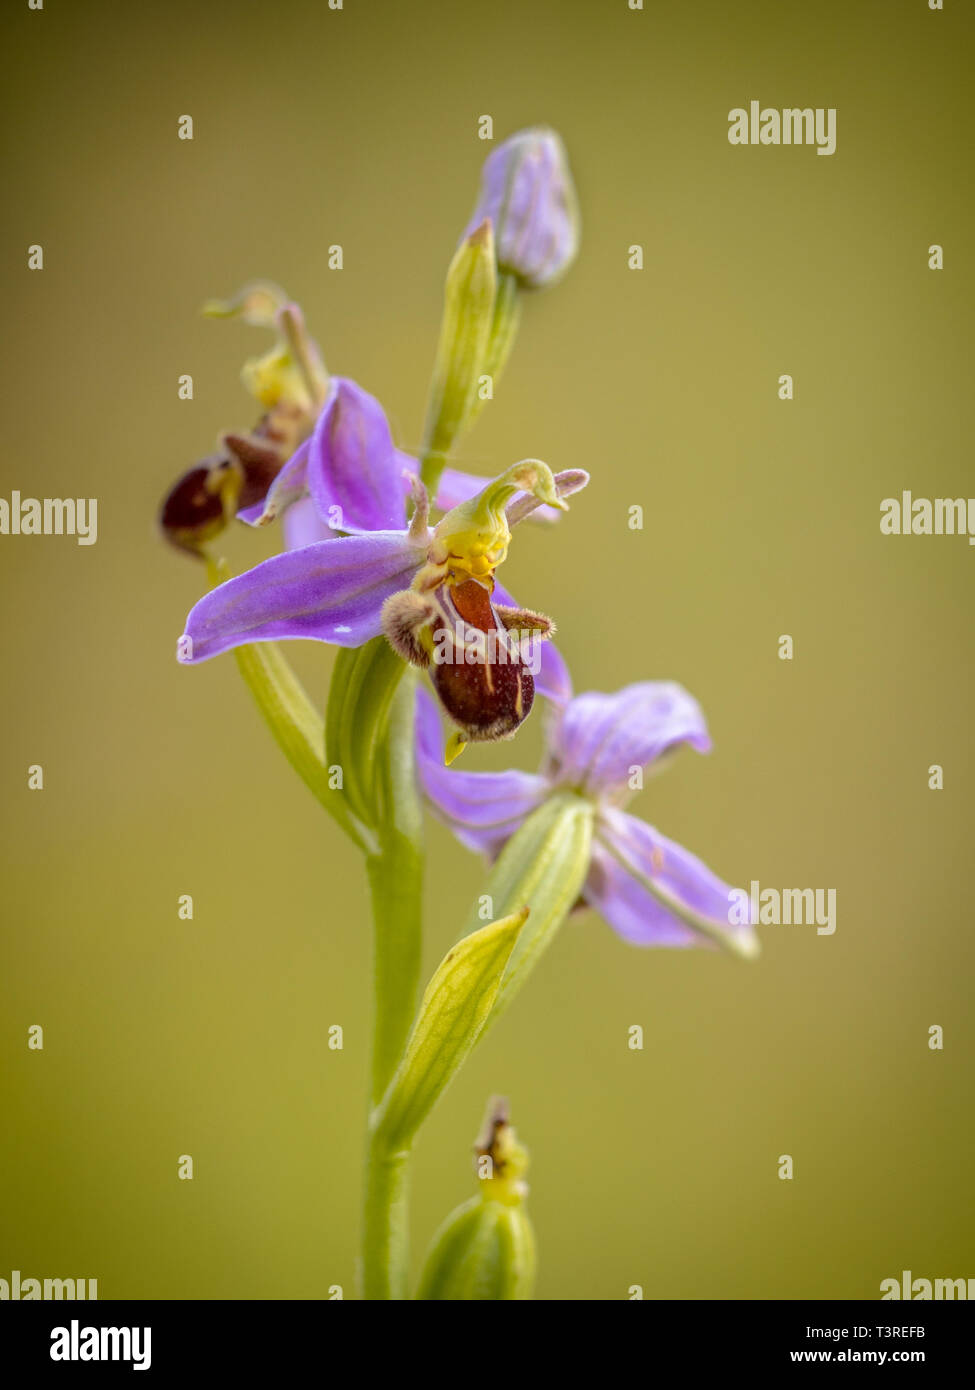 Bee orchid (Ophrys apifera) pink flowers mimicing humblebee insects to polinate the flower. On blurred green background Stock Photo